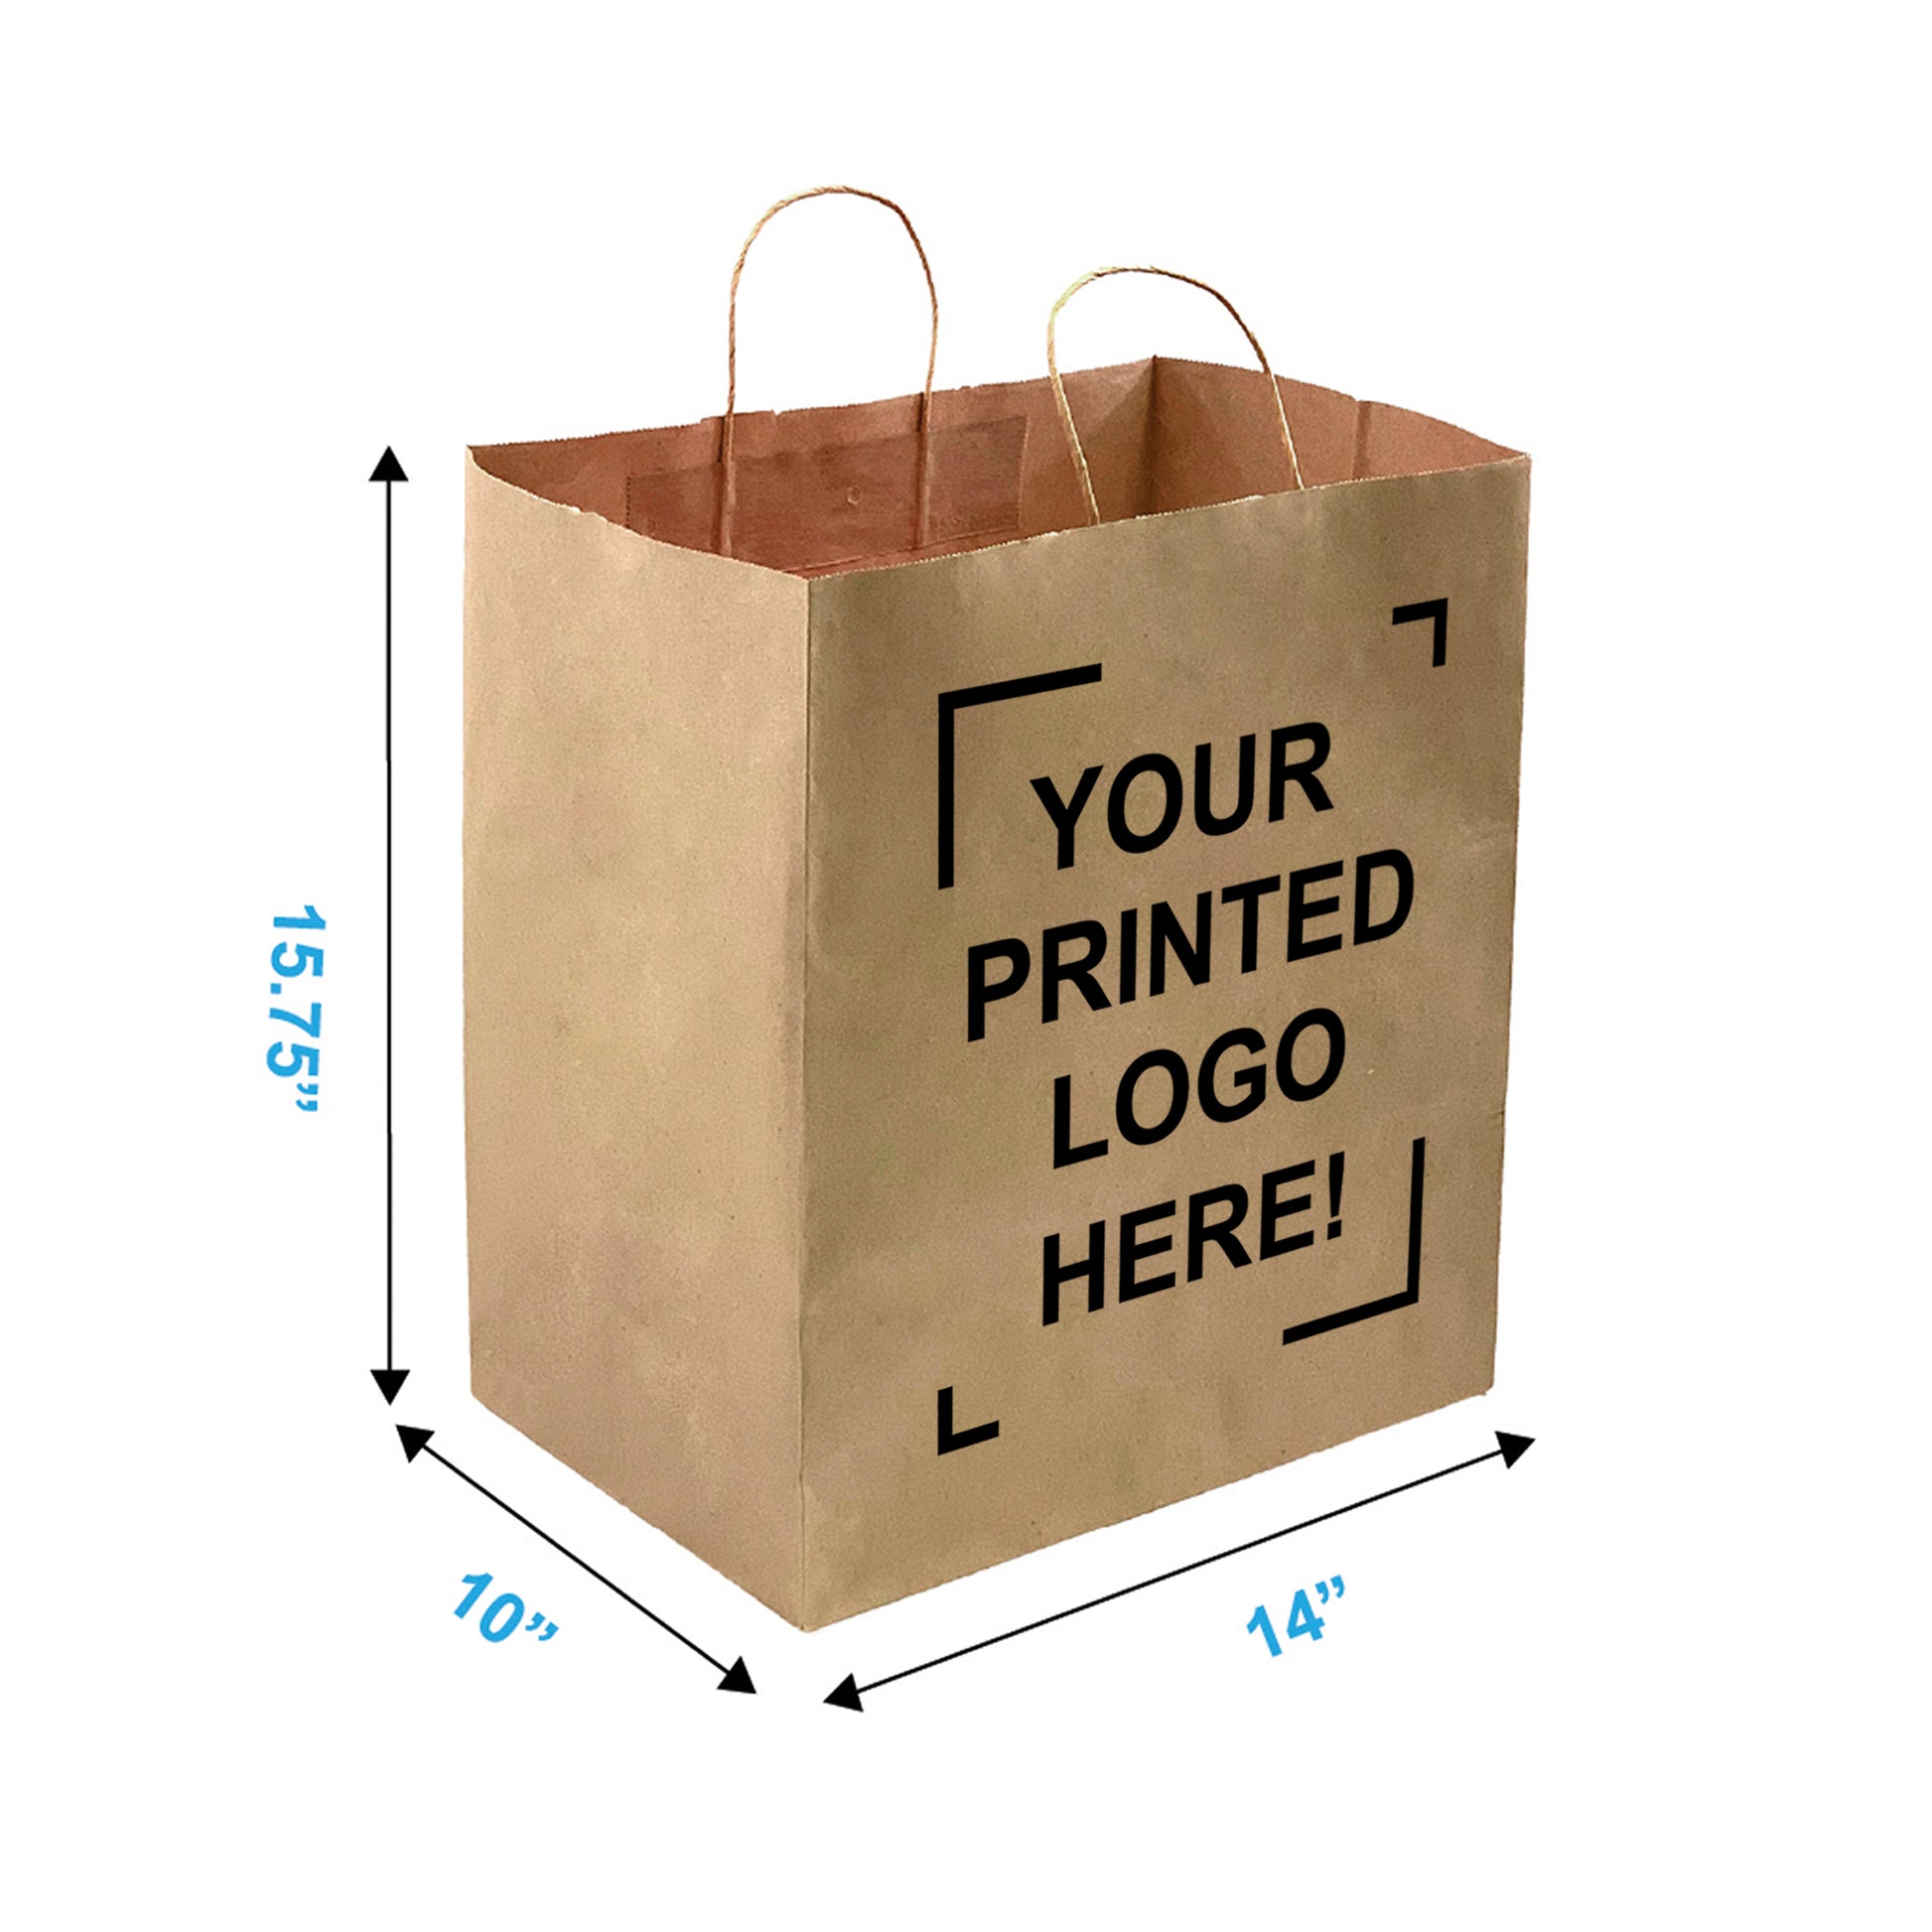 200 Pcs, Super Royal, 14x10x15.75 inches, Kraft Paper Bags, with Twisted Handle, Full Color Custom Print